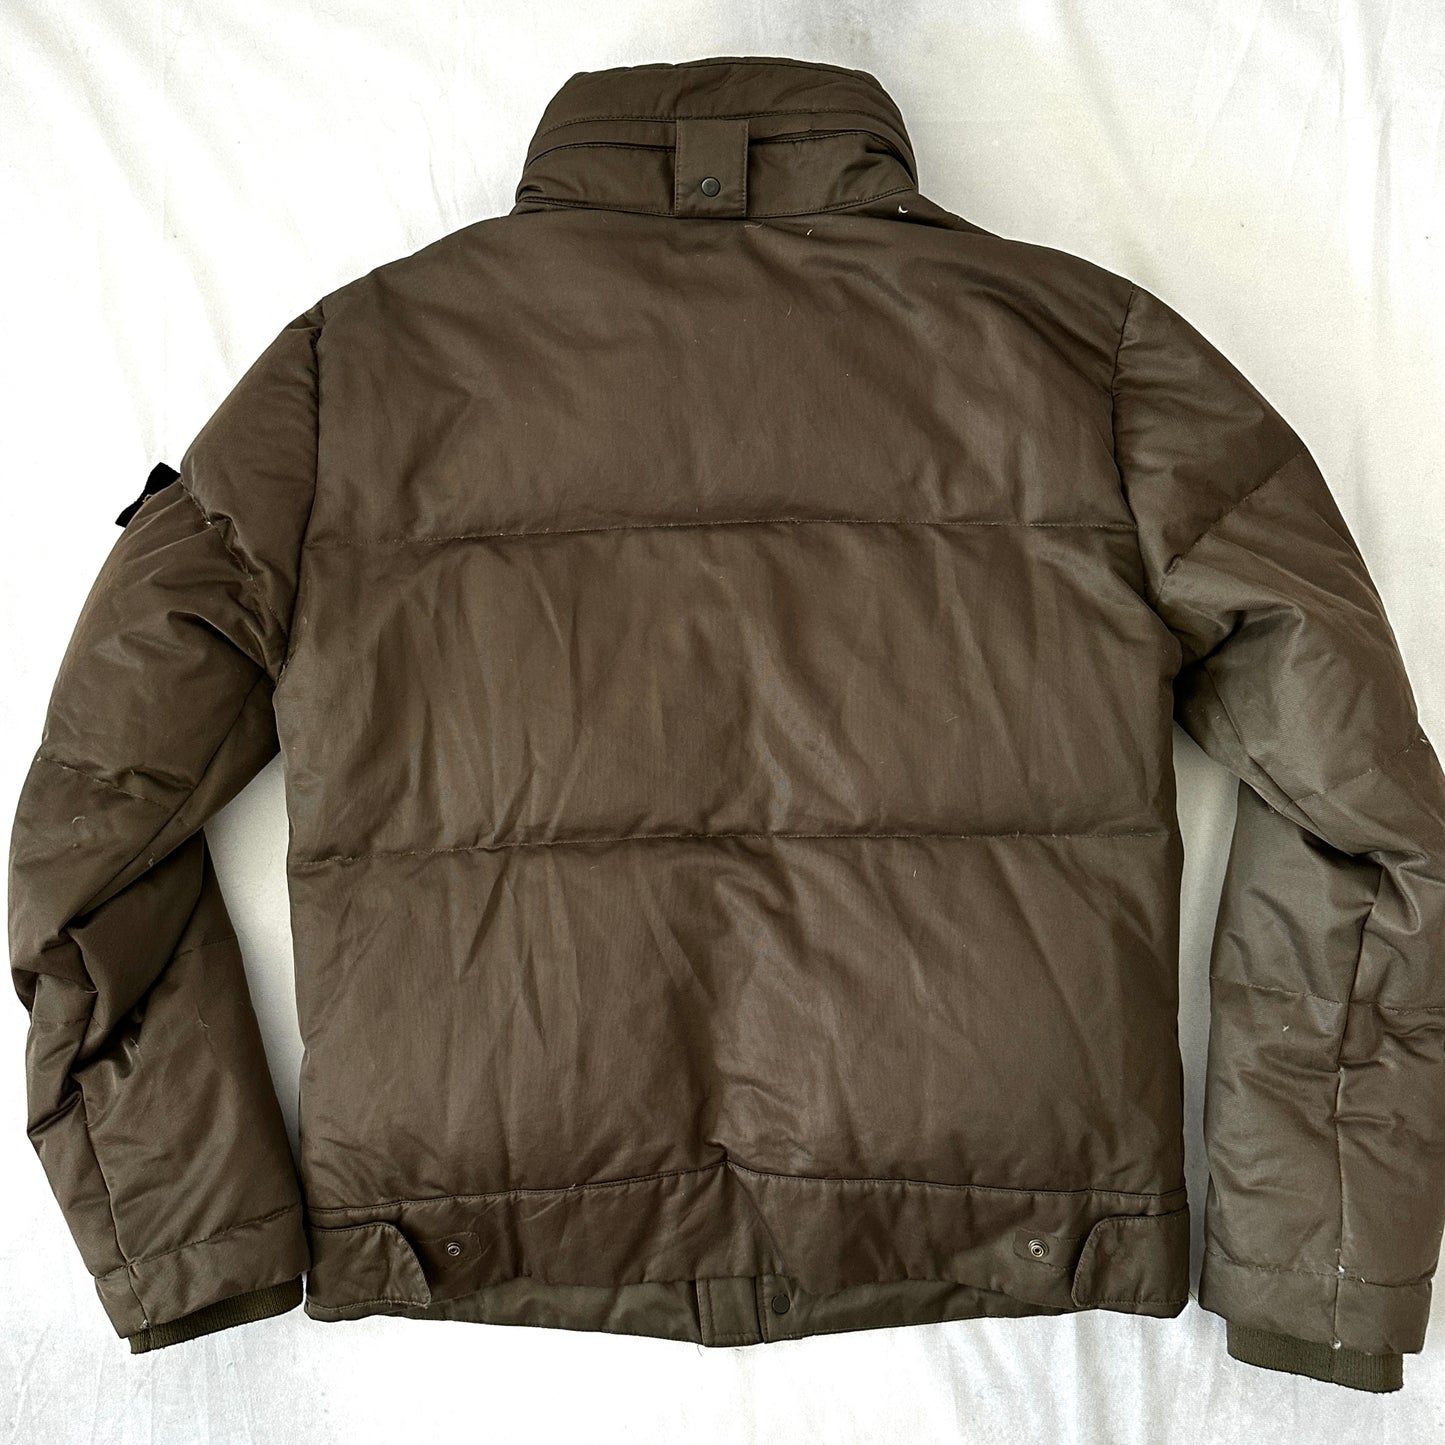 Stone Island 2009 Weatherproof Down Jacket - L - Made in Italy